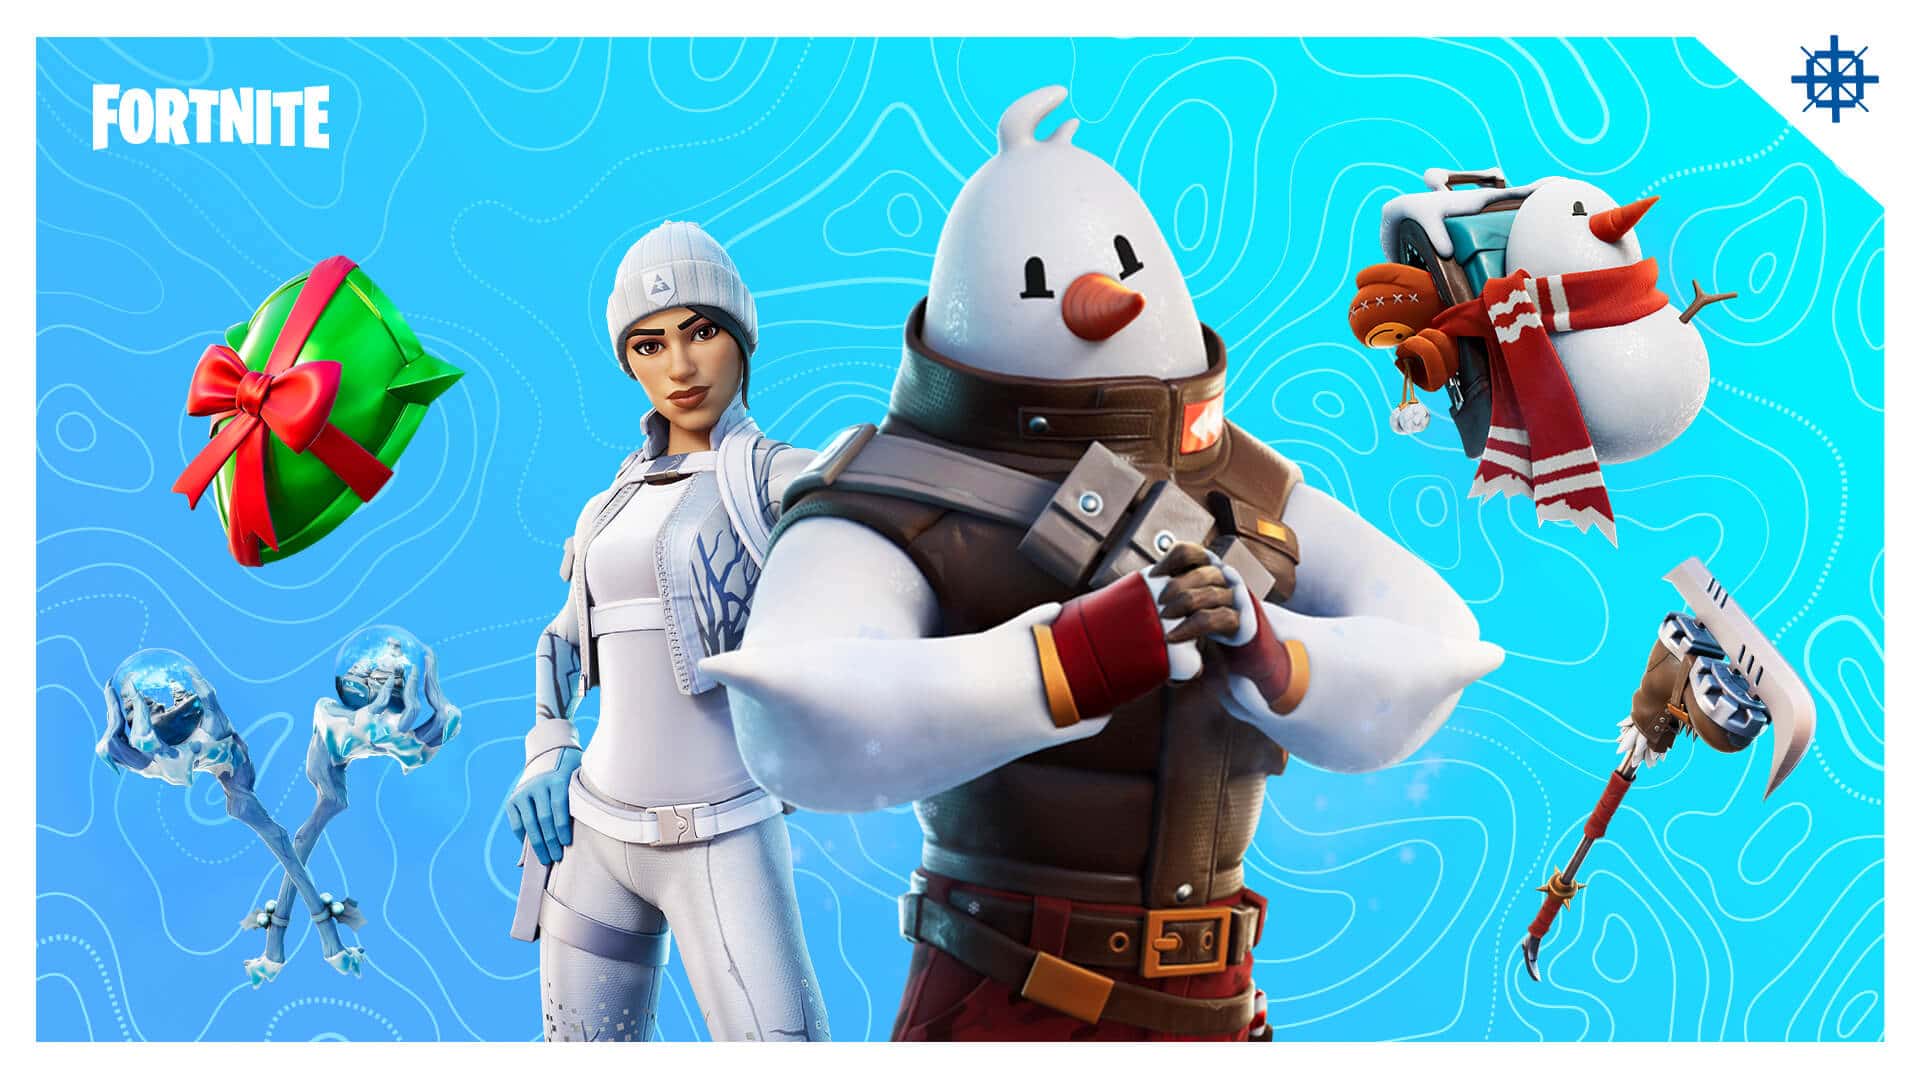 Fortnite Were Is Snowfall And What Is His Plan Fortnite Season 5 Operation Snowfall Quests List Complete Guide Sportsgaming Win